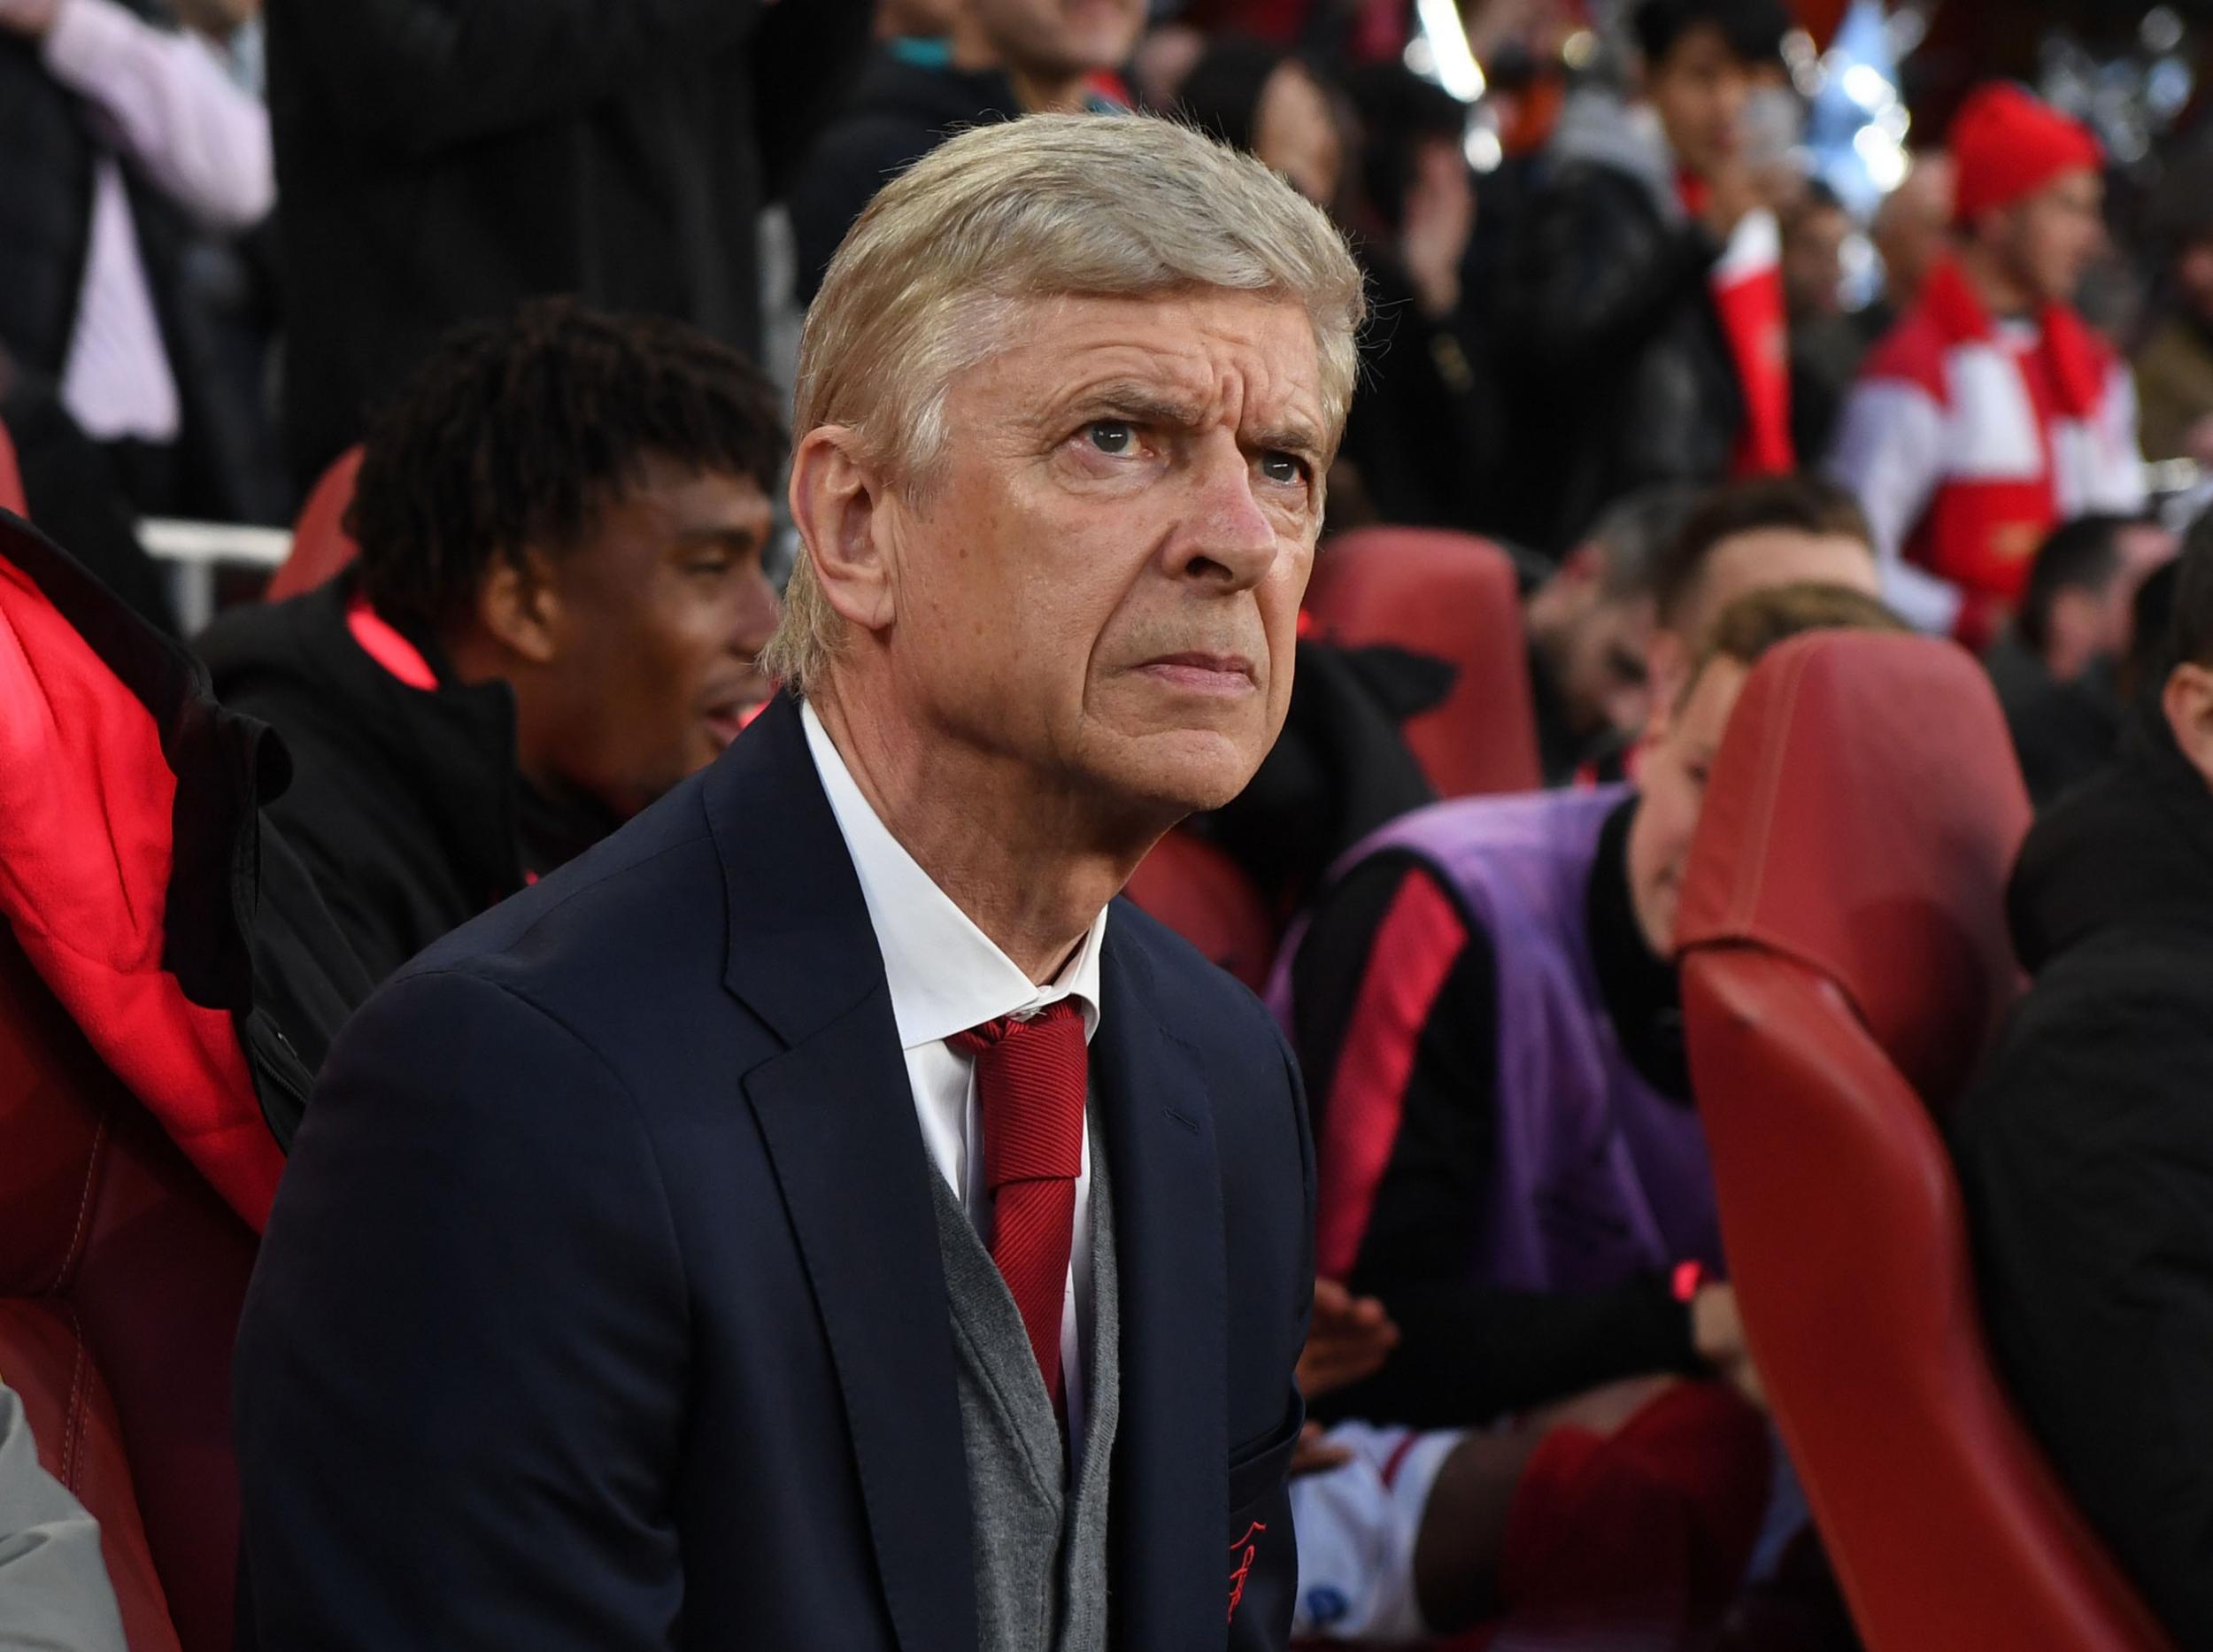 Sunday could be Wenger's last trip to Old Trafford